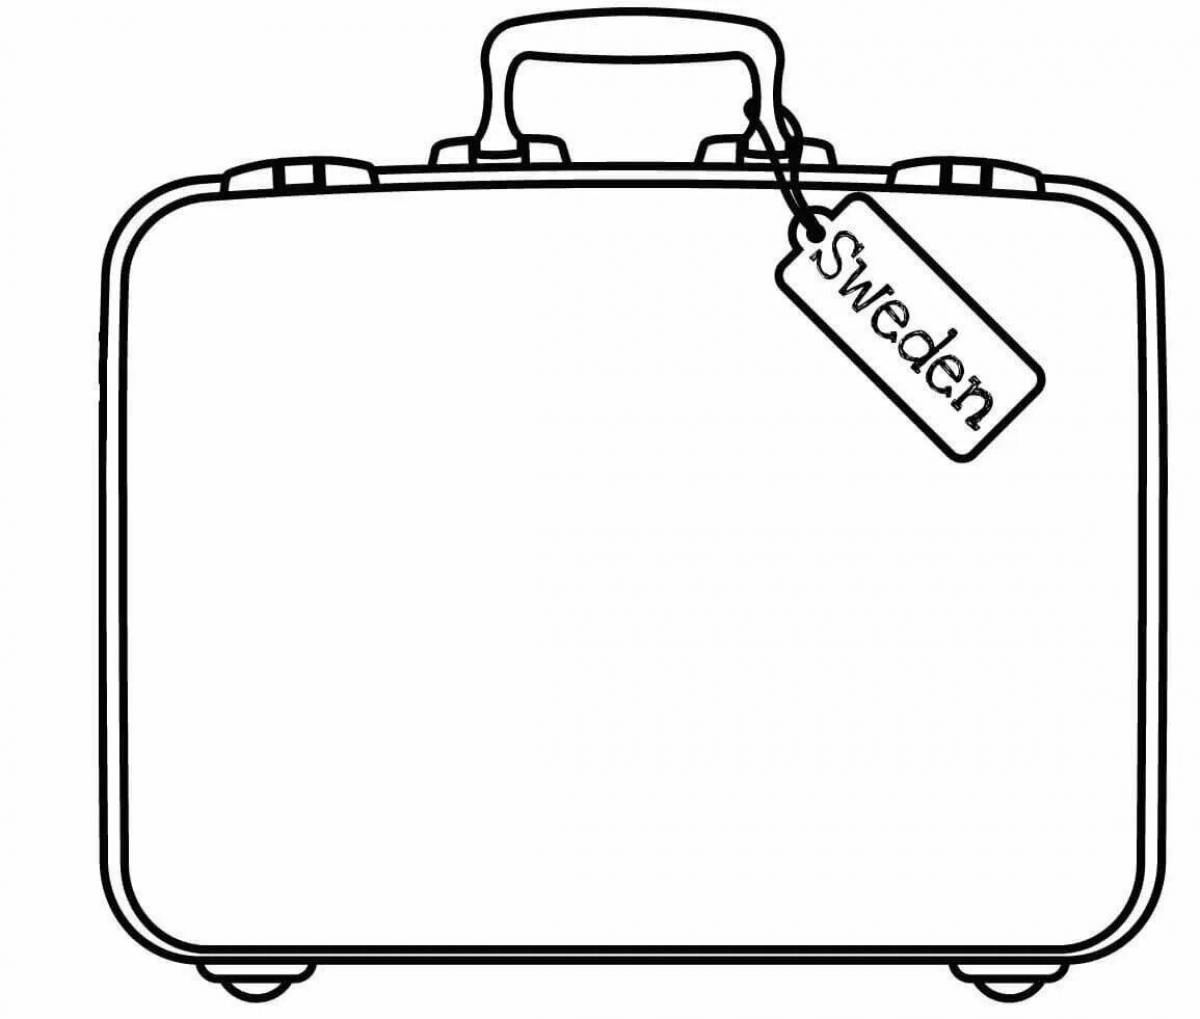 Adorable suitcase coloring book for kids